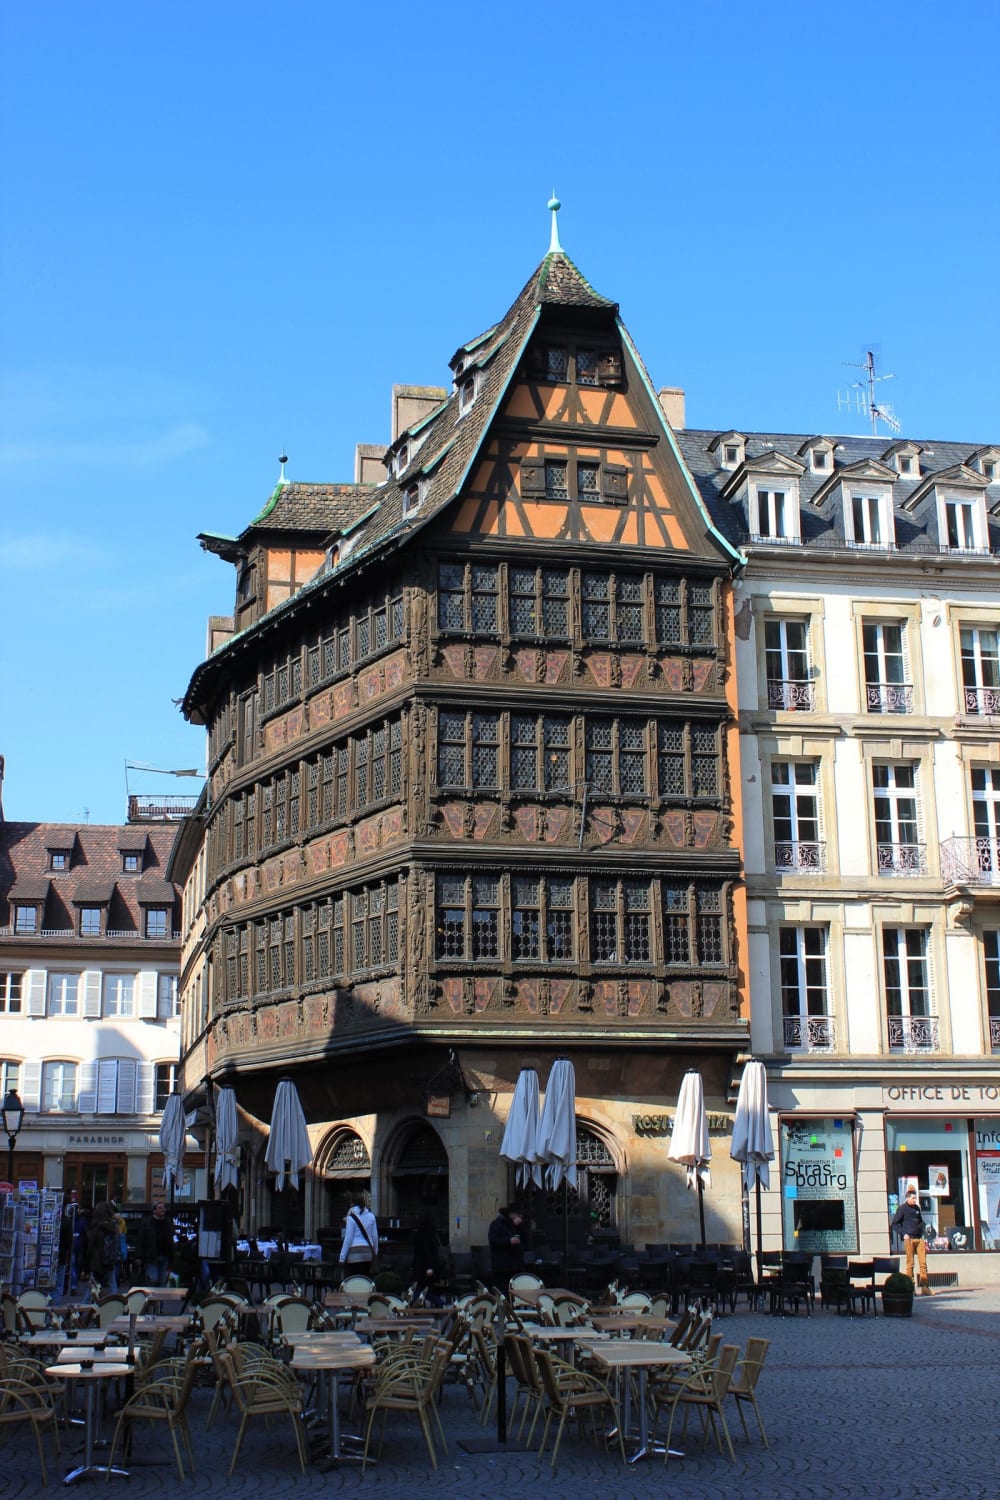 The Kammerzell House is one of the most famous buildings of Strasbourg and one of the most ornate and well preserved medieval civil housing buildings in late Gothic architecture (Built in 1427 but twice transformed in 1467 and 1589)